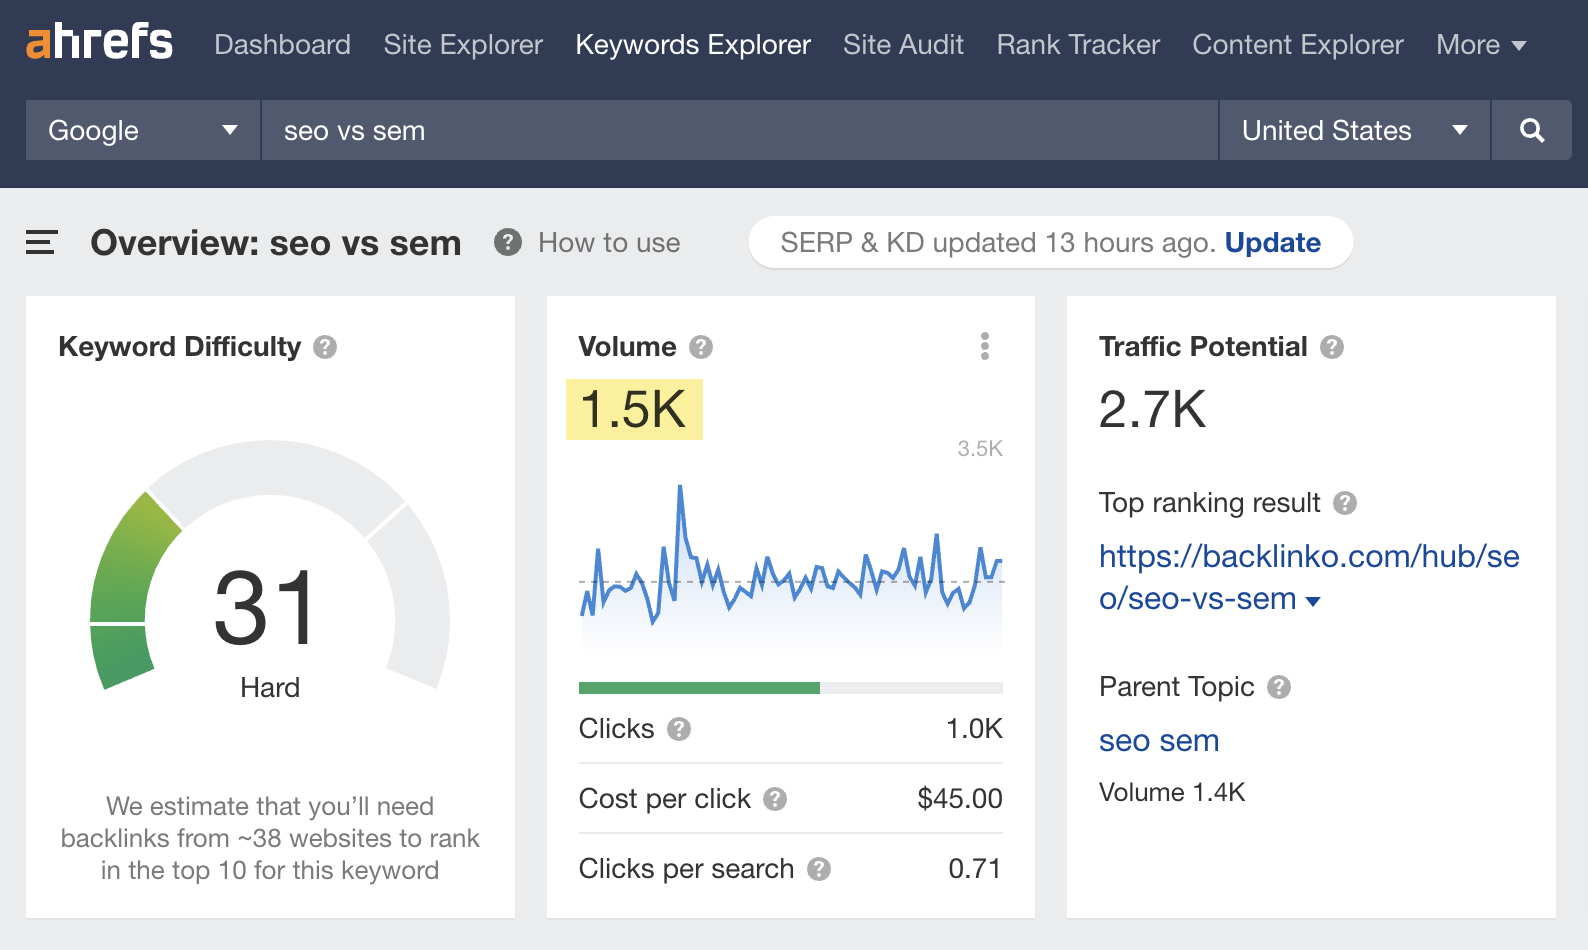 Monthly U.S. search volume for "seo vs sem"